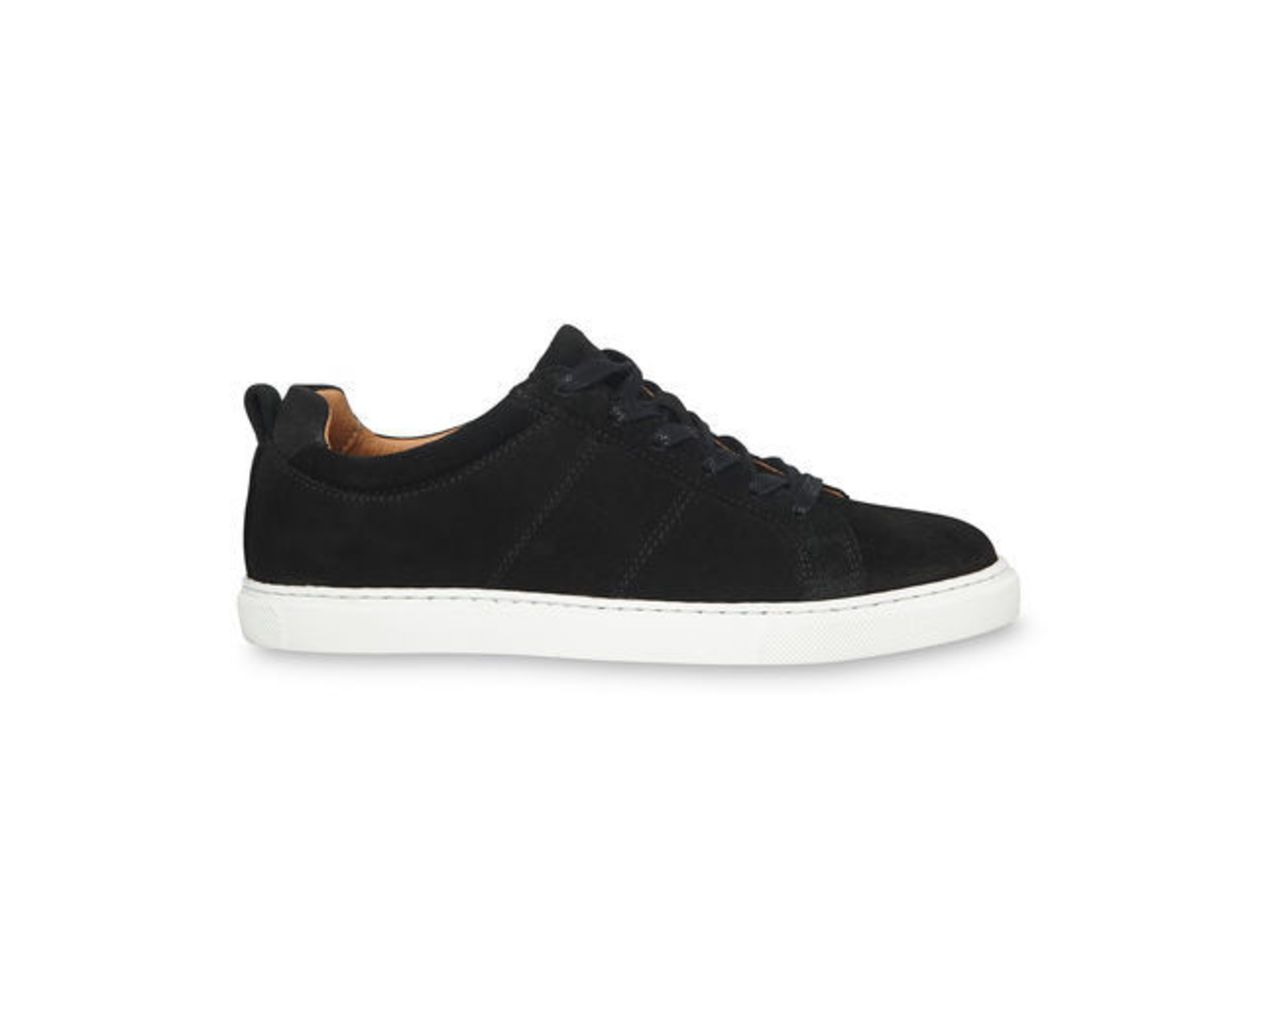 Koki Suede Lace up Trainer